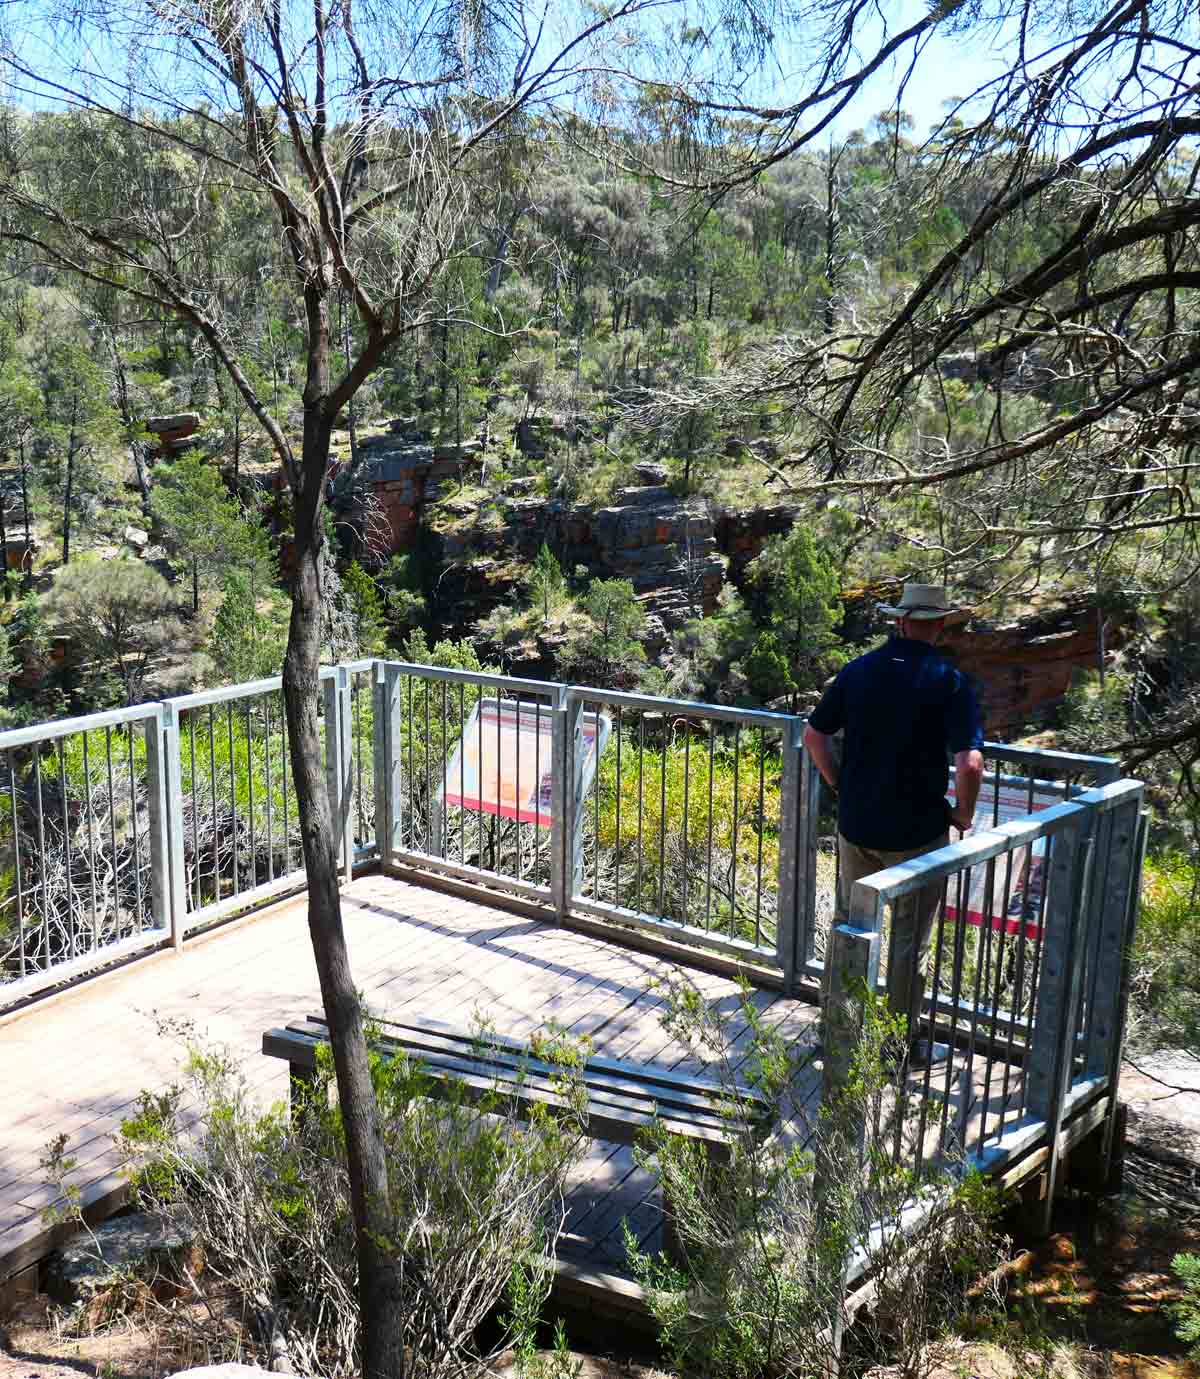 Ali Lookout at Alligator Gorge in Wilmington, South Australia